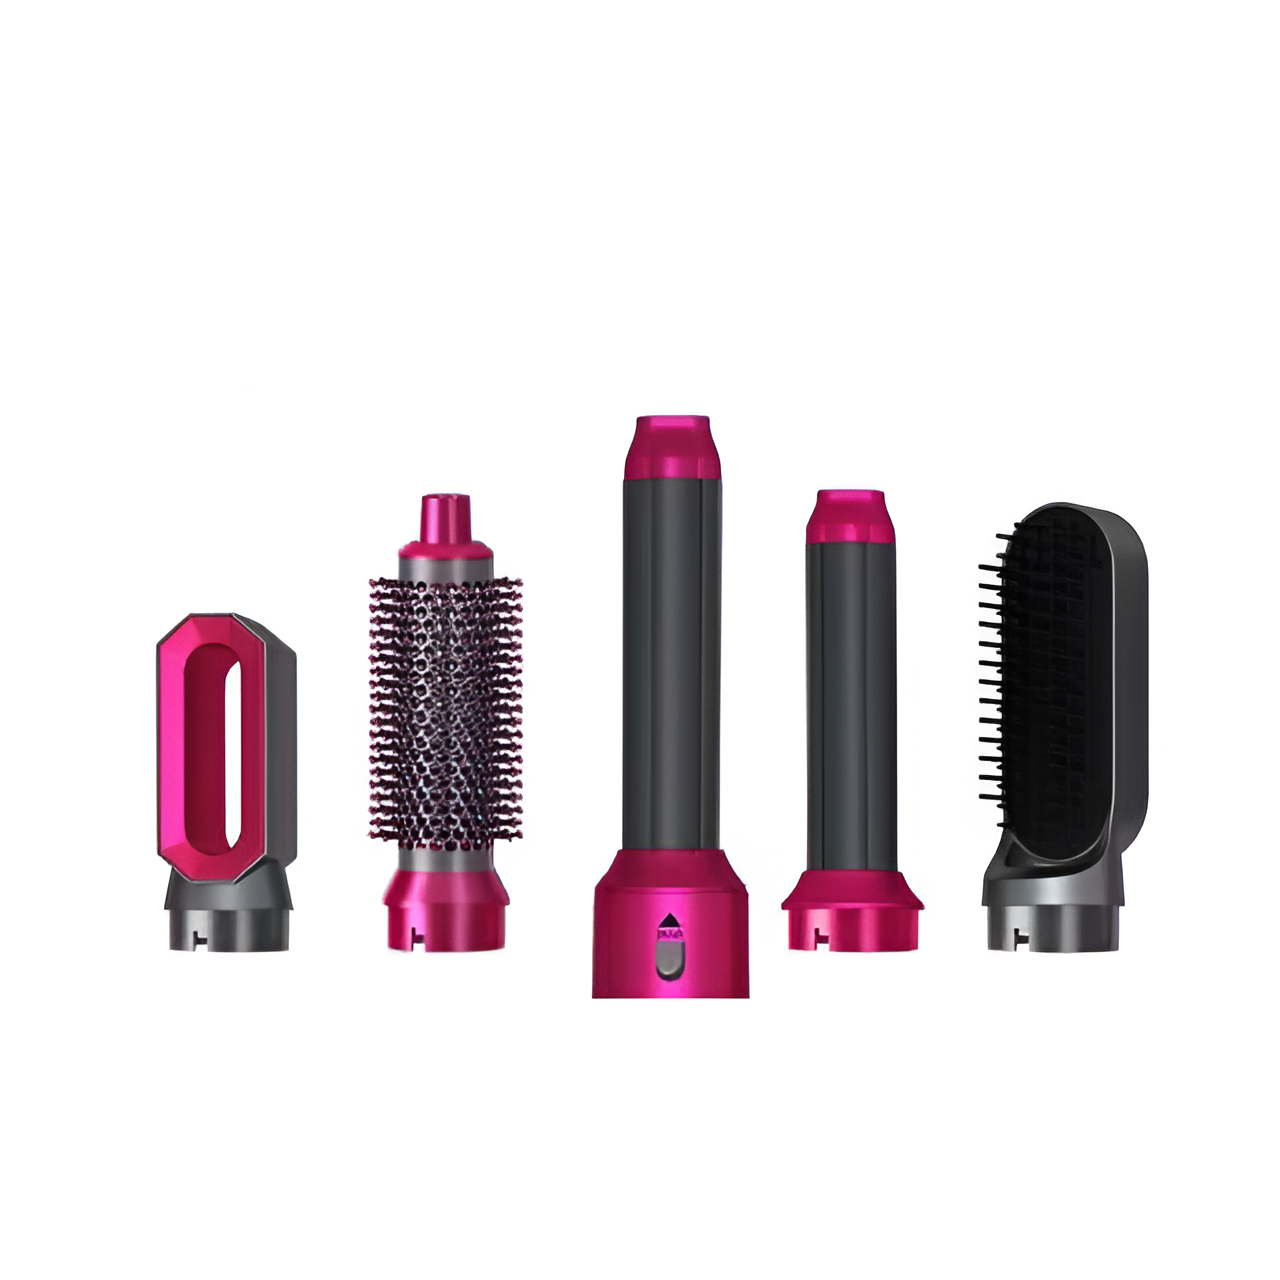 5-in-1 Hair dryer and styling brush